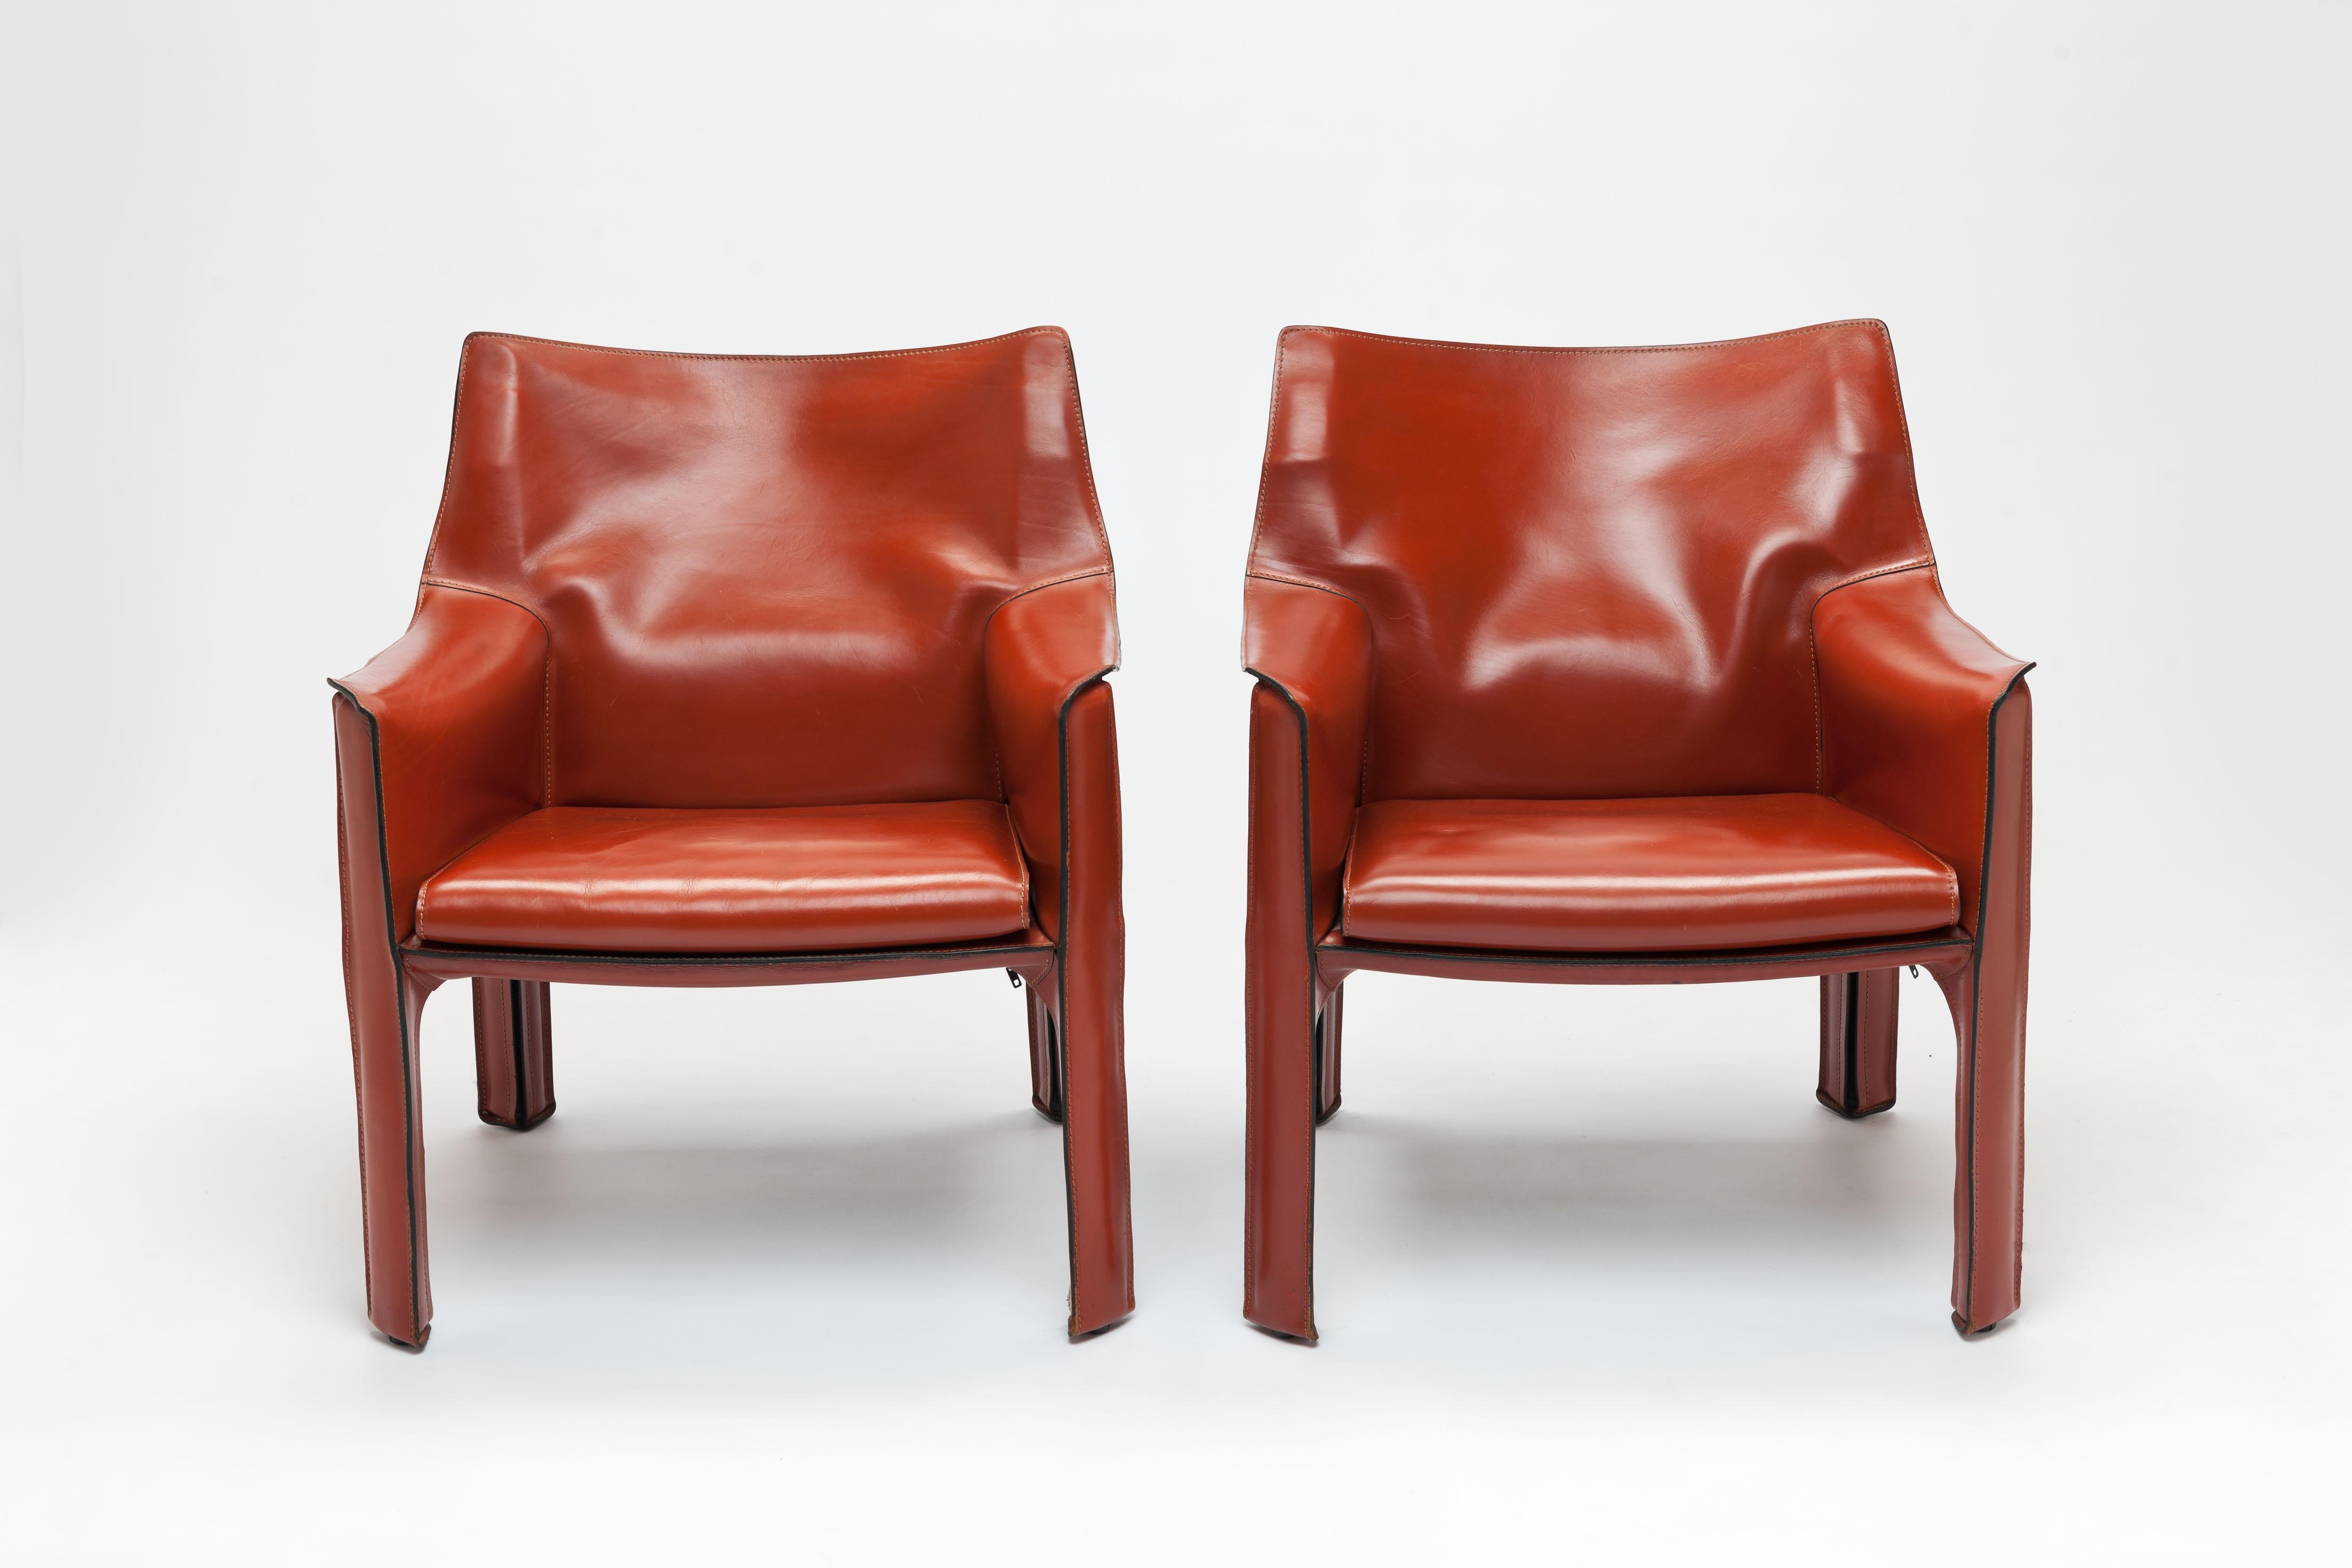 Pair of 1980s model CAB 414 lounge chairs by Mario Bellini for Cassina Italy.
Exceptional high-quality chairs consists of a leather cover stretched over a steel frame.
Bellini's innovation lay in using zips to fasten the leather cover to its frame;